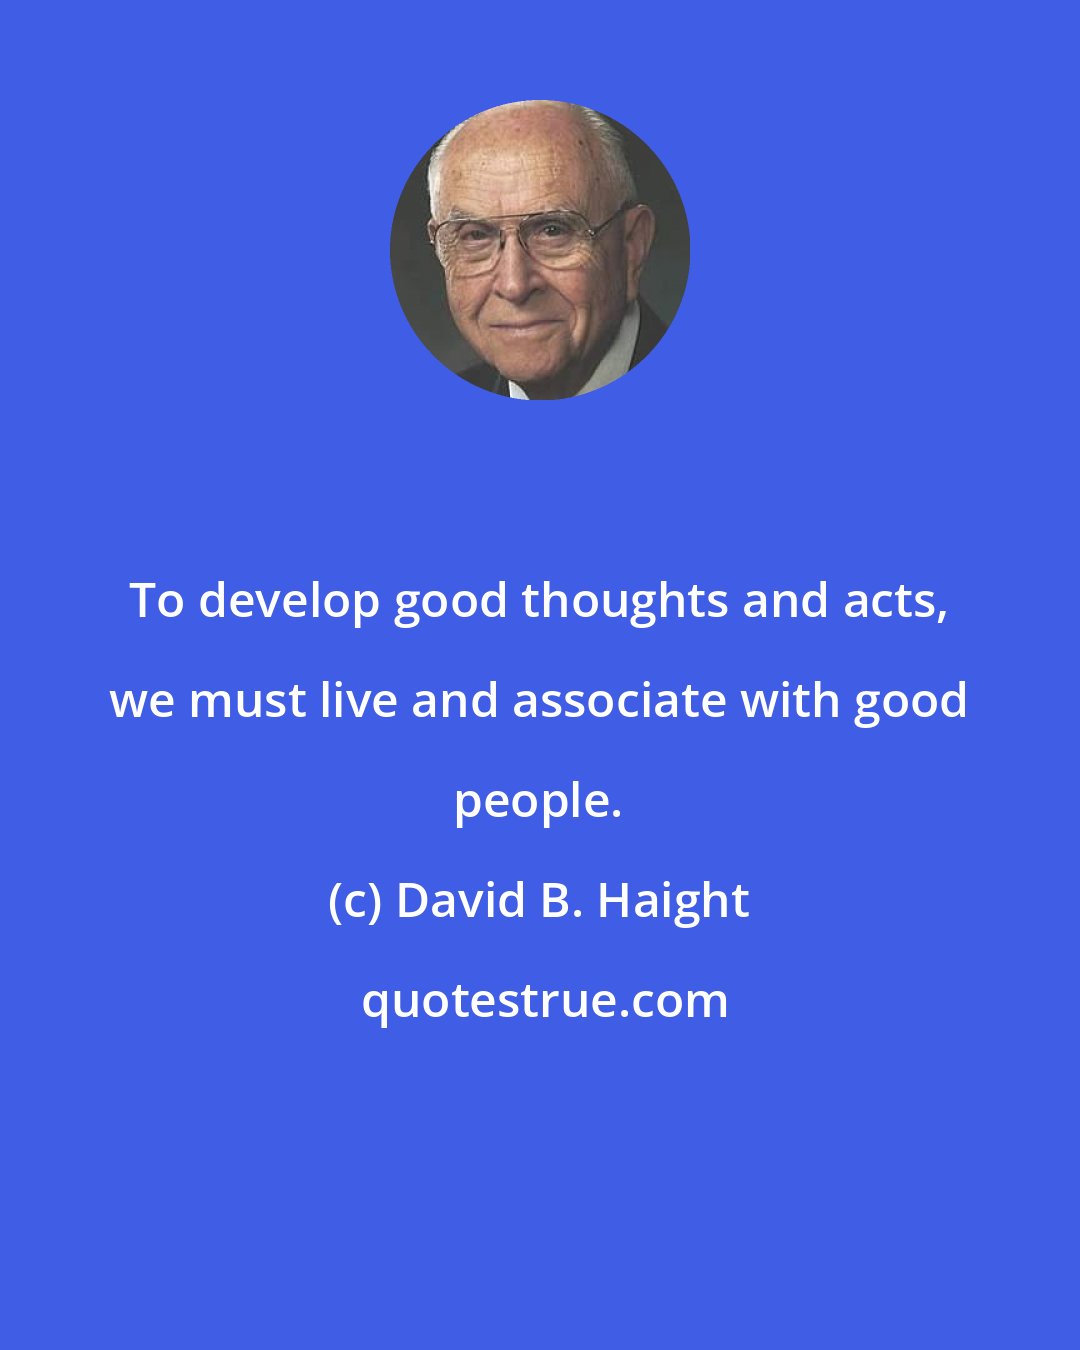 David B. Haight: To develop good thoughts and acts, we must live and associate with good people.